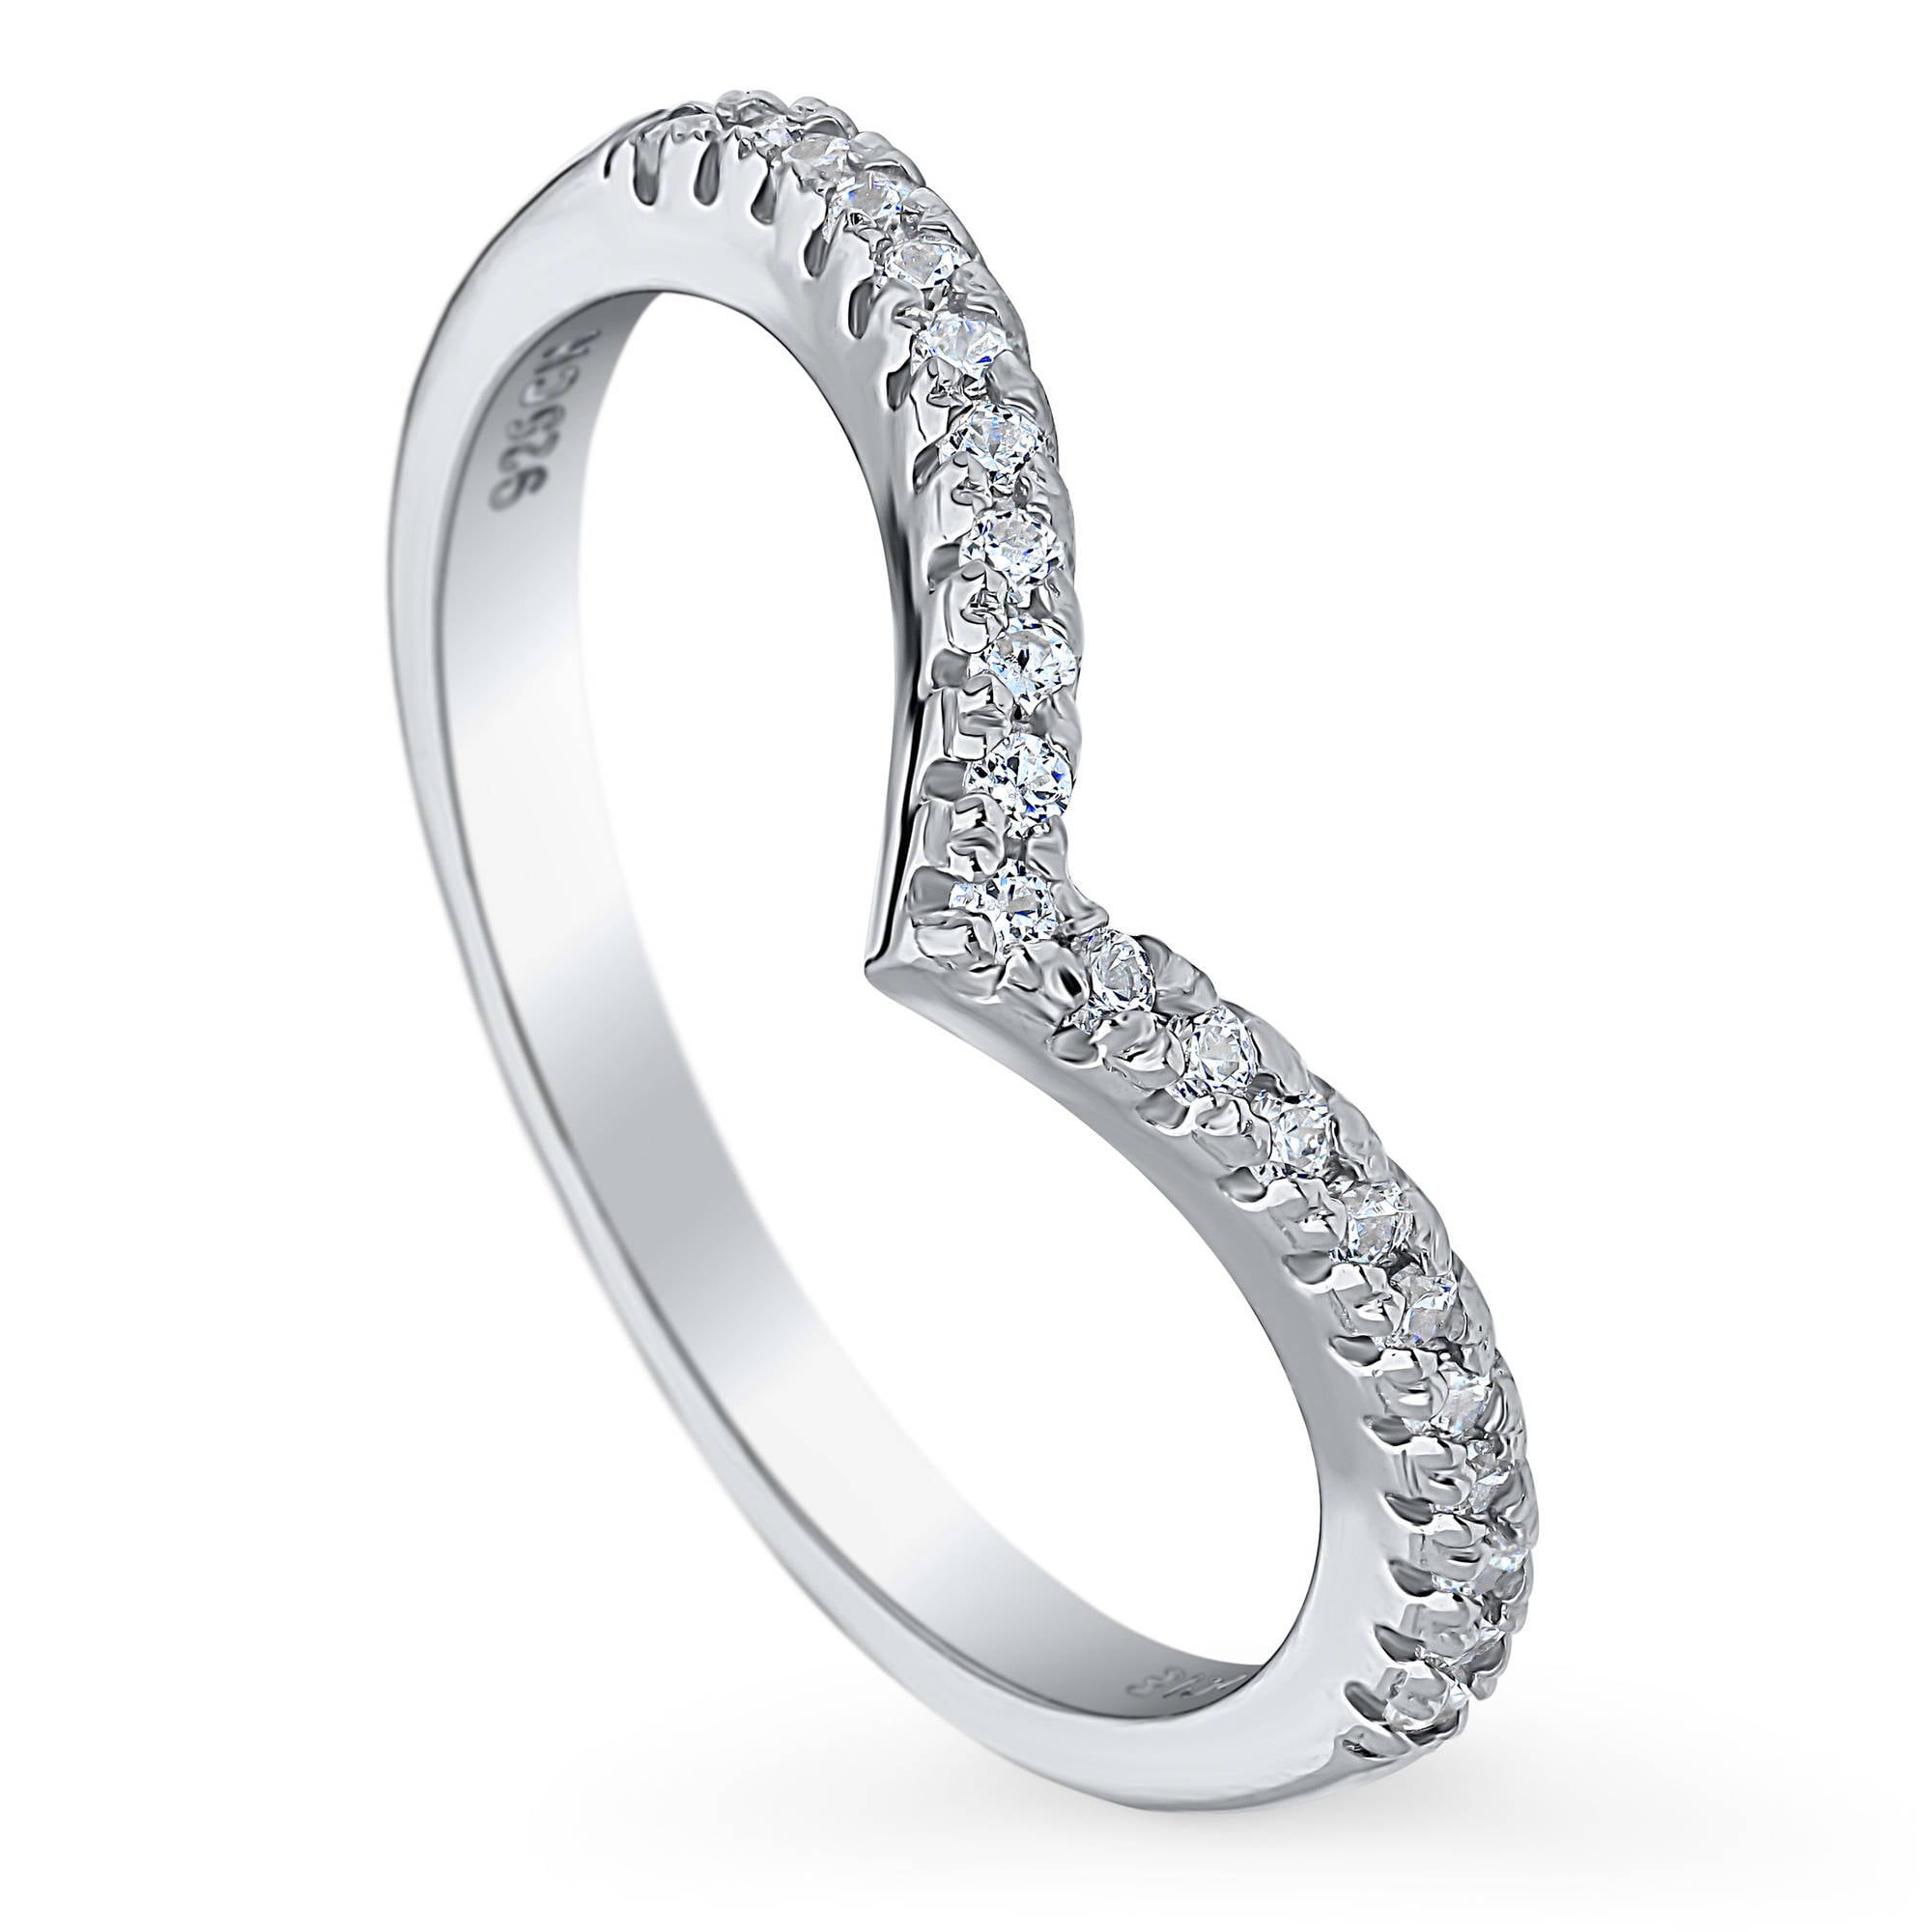 BERRICLE Sterling Silver Wishbone Wedding Rings Cubic Zirconia CZ Curved  Eternity Ring for Women, Rhodium Plated Size 10